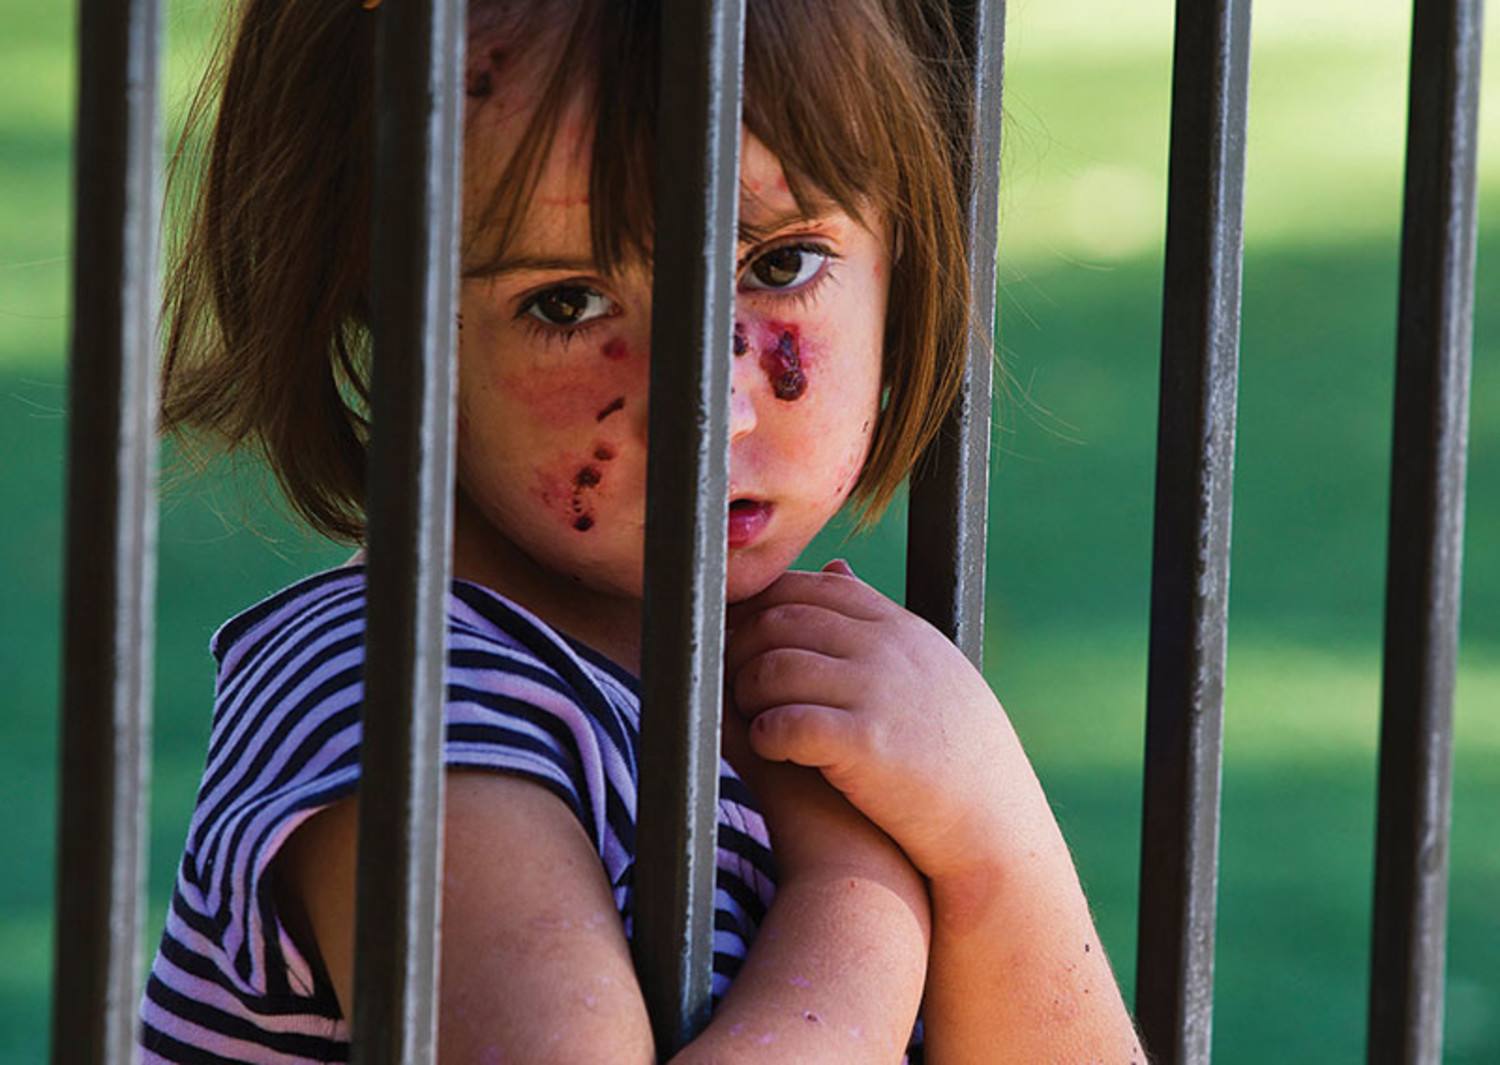 Lizzy Hendrickson hangs on a fence while playing during recess at Prince of Peace Preschool in Phoenix, Ariz. The four-year-old suffers from Epidermolysis Bullosa, a rare genetic skin disease that causes the skin to be so fragile that the slightest friction can cause severe blistering. There is no cure.